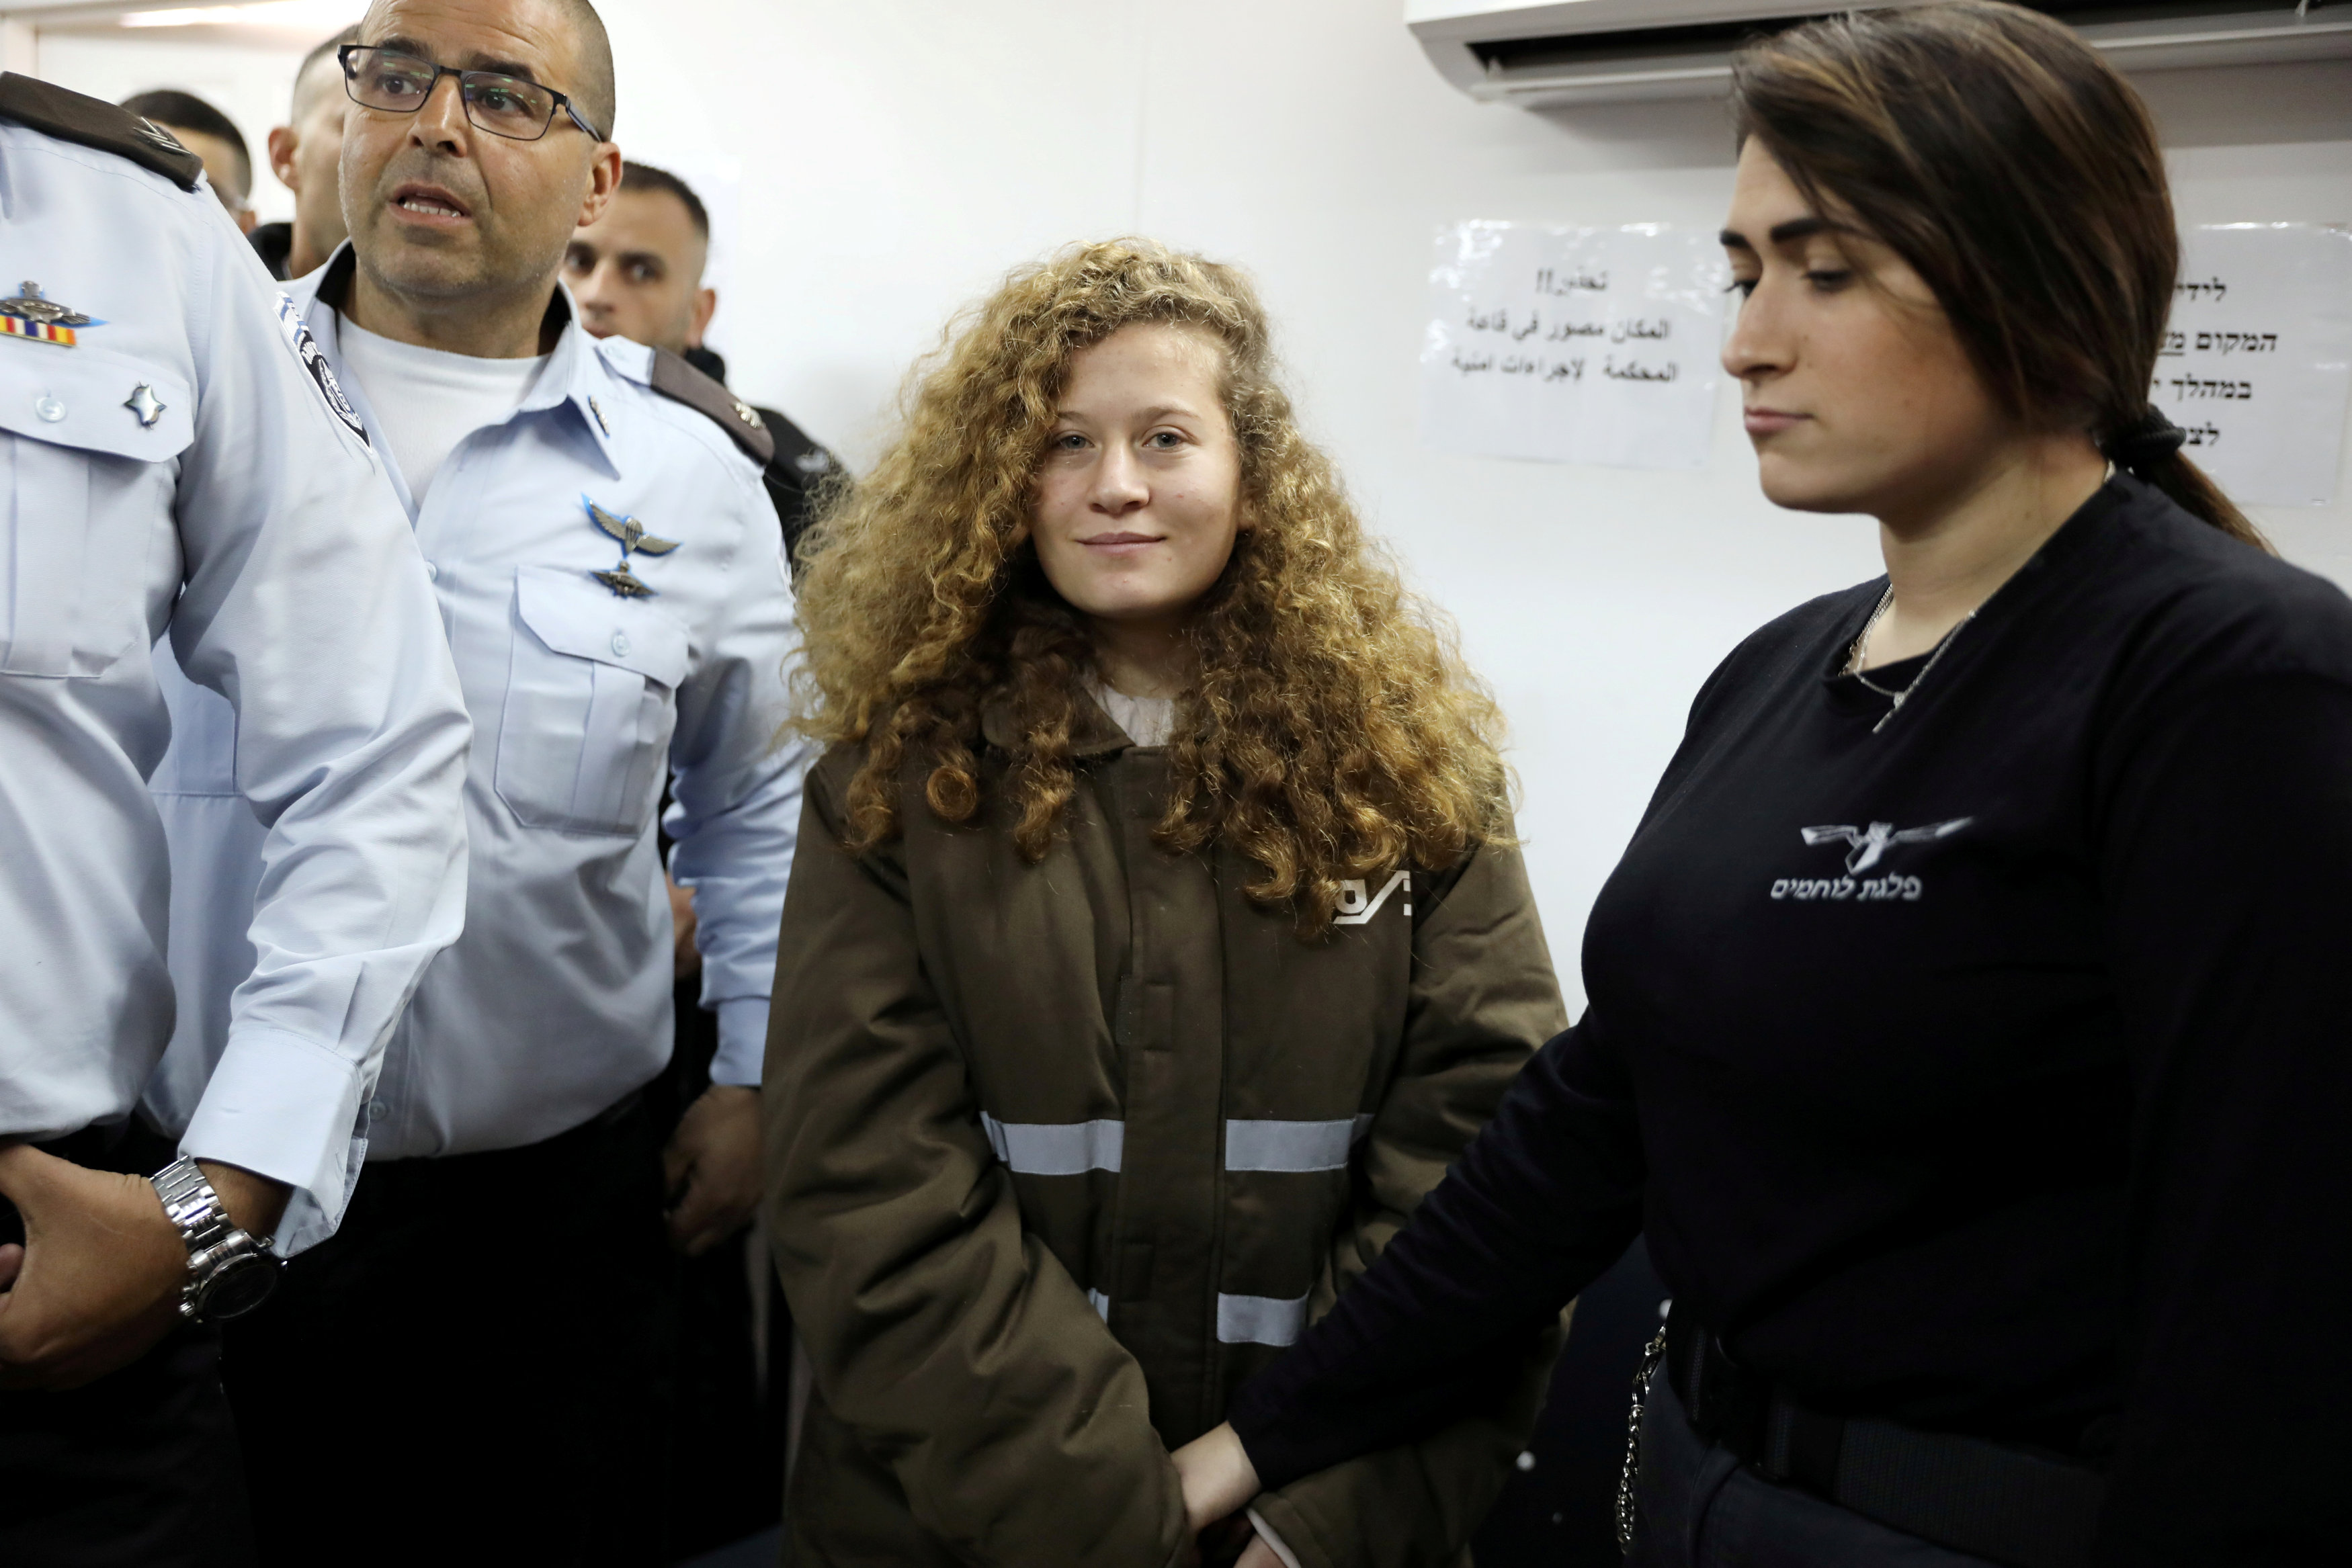 Palestinian teen Ahed Tamimi enters a military courtroom at Ofer Prison, near the West Bank city of Ramallah, January 15, 2018.